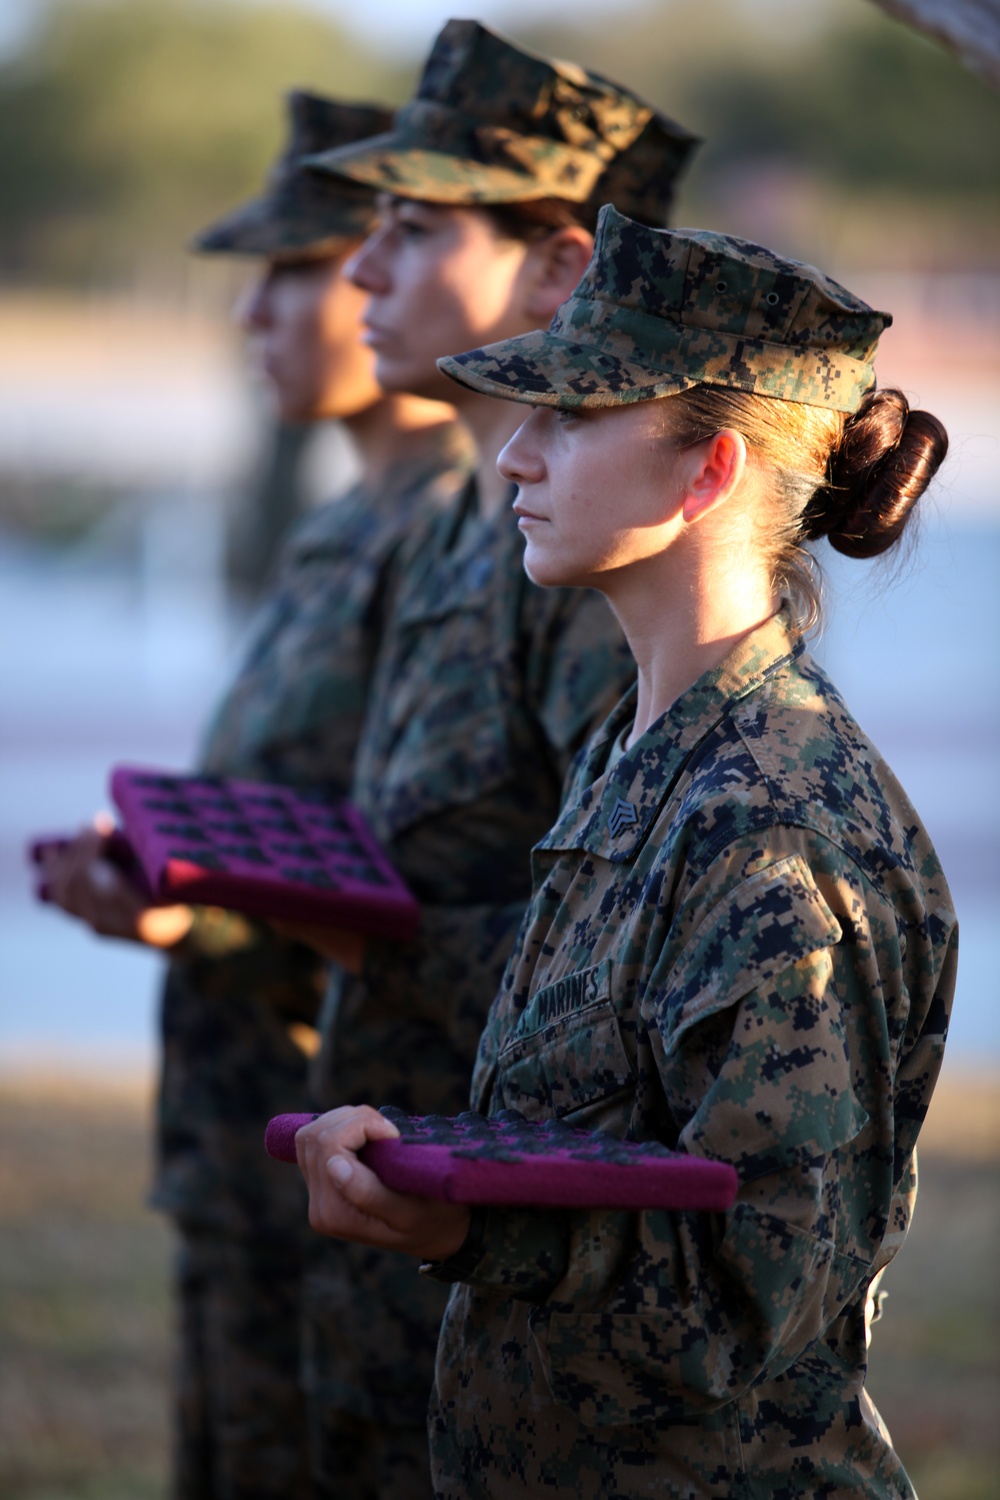 DVIDS - Images - 4th RTBN Eagle, Globe, and Anchor Ceremony [Image 1 of 5]